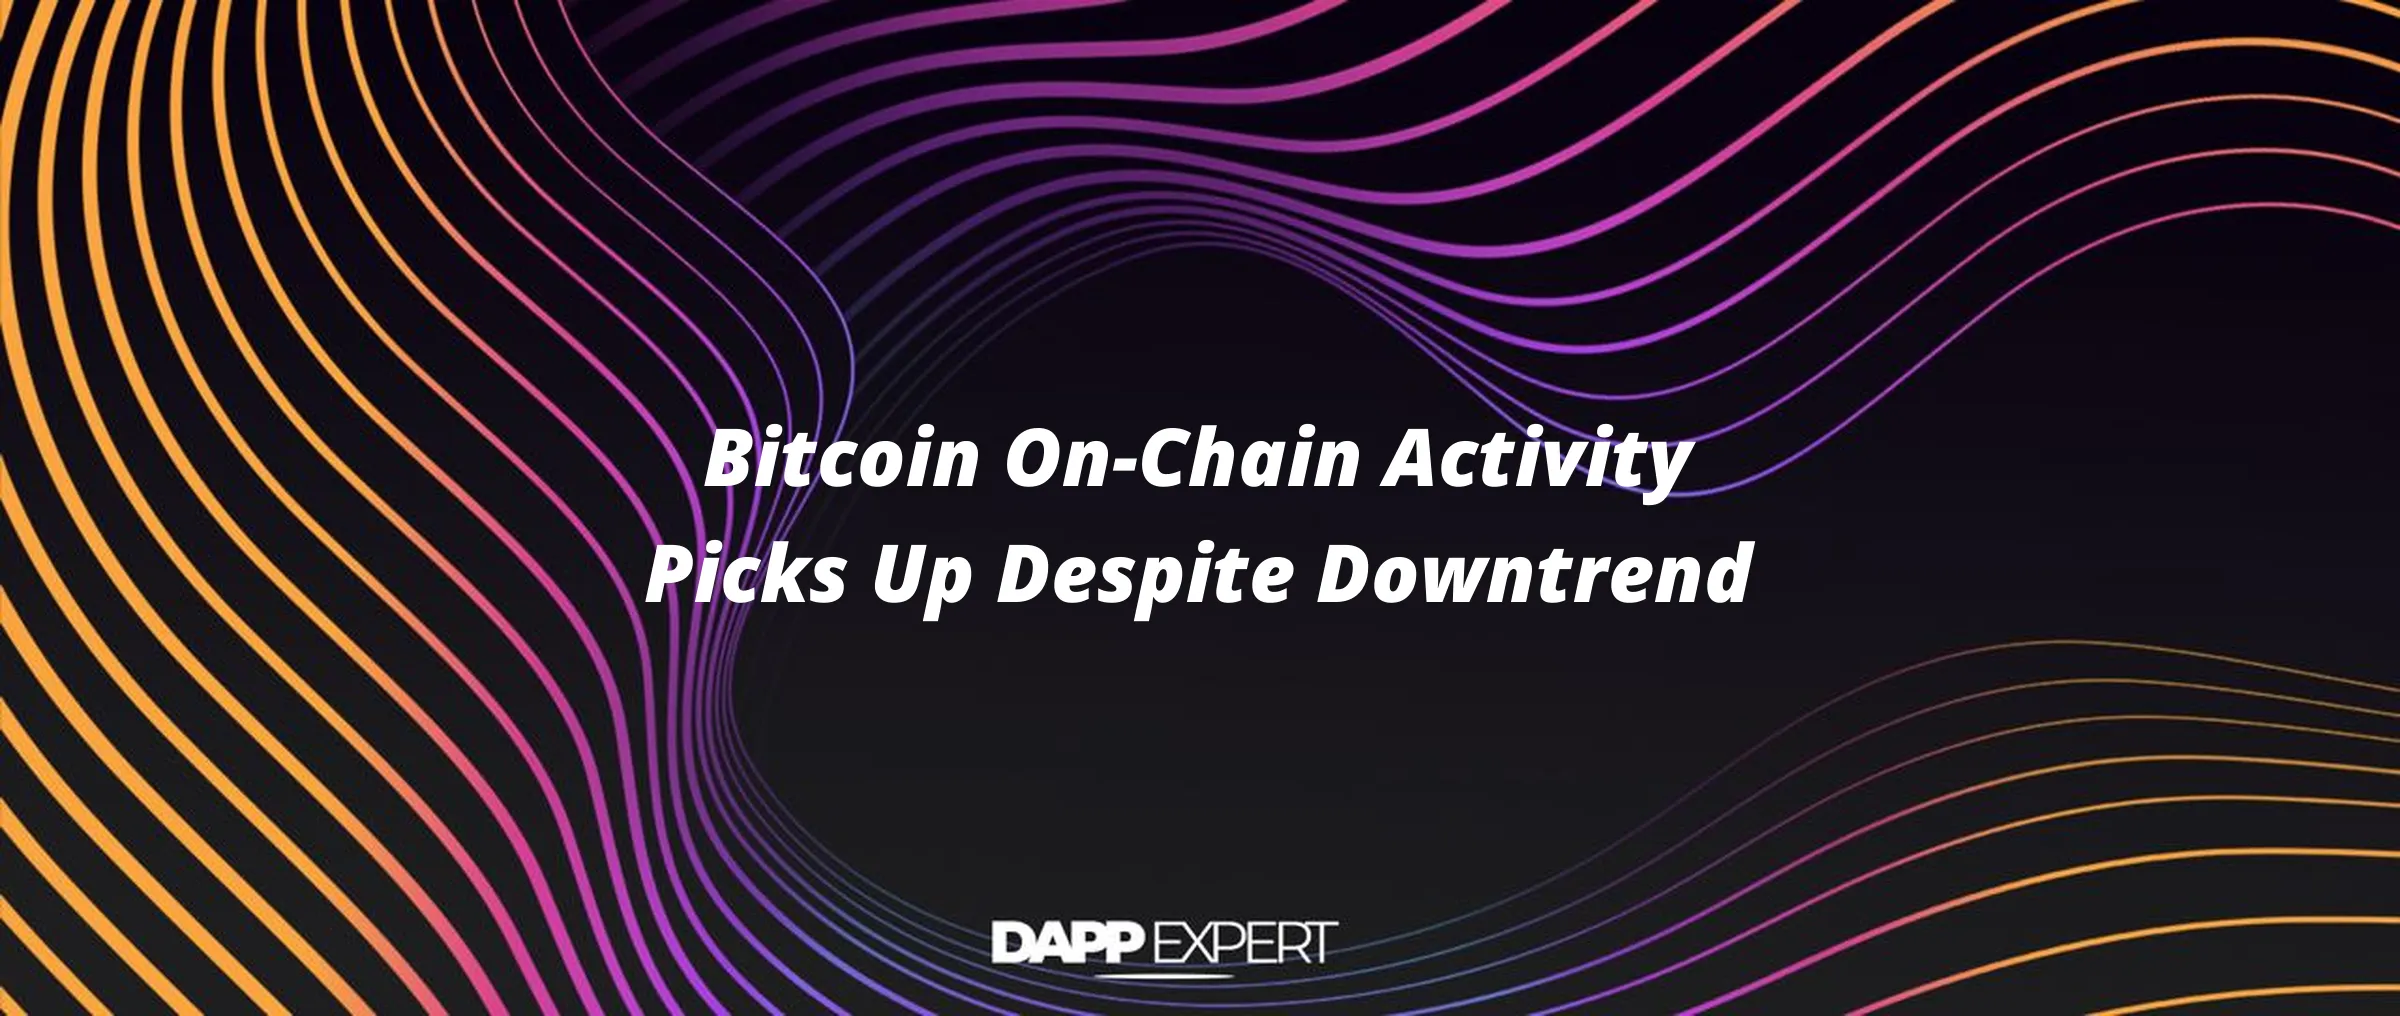 Bitcoin On-Chain Activity Picks Up Despite Downtrend